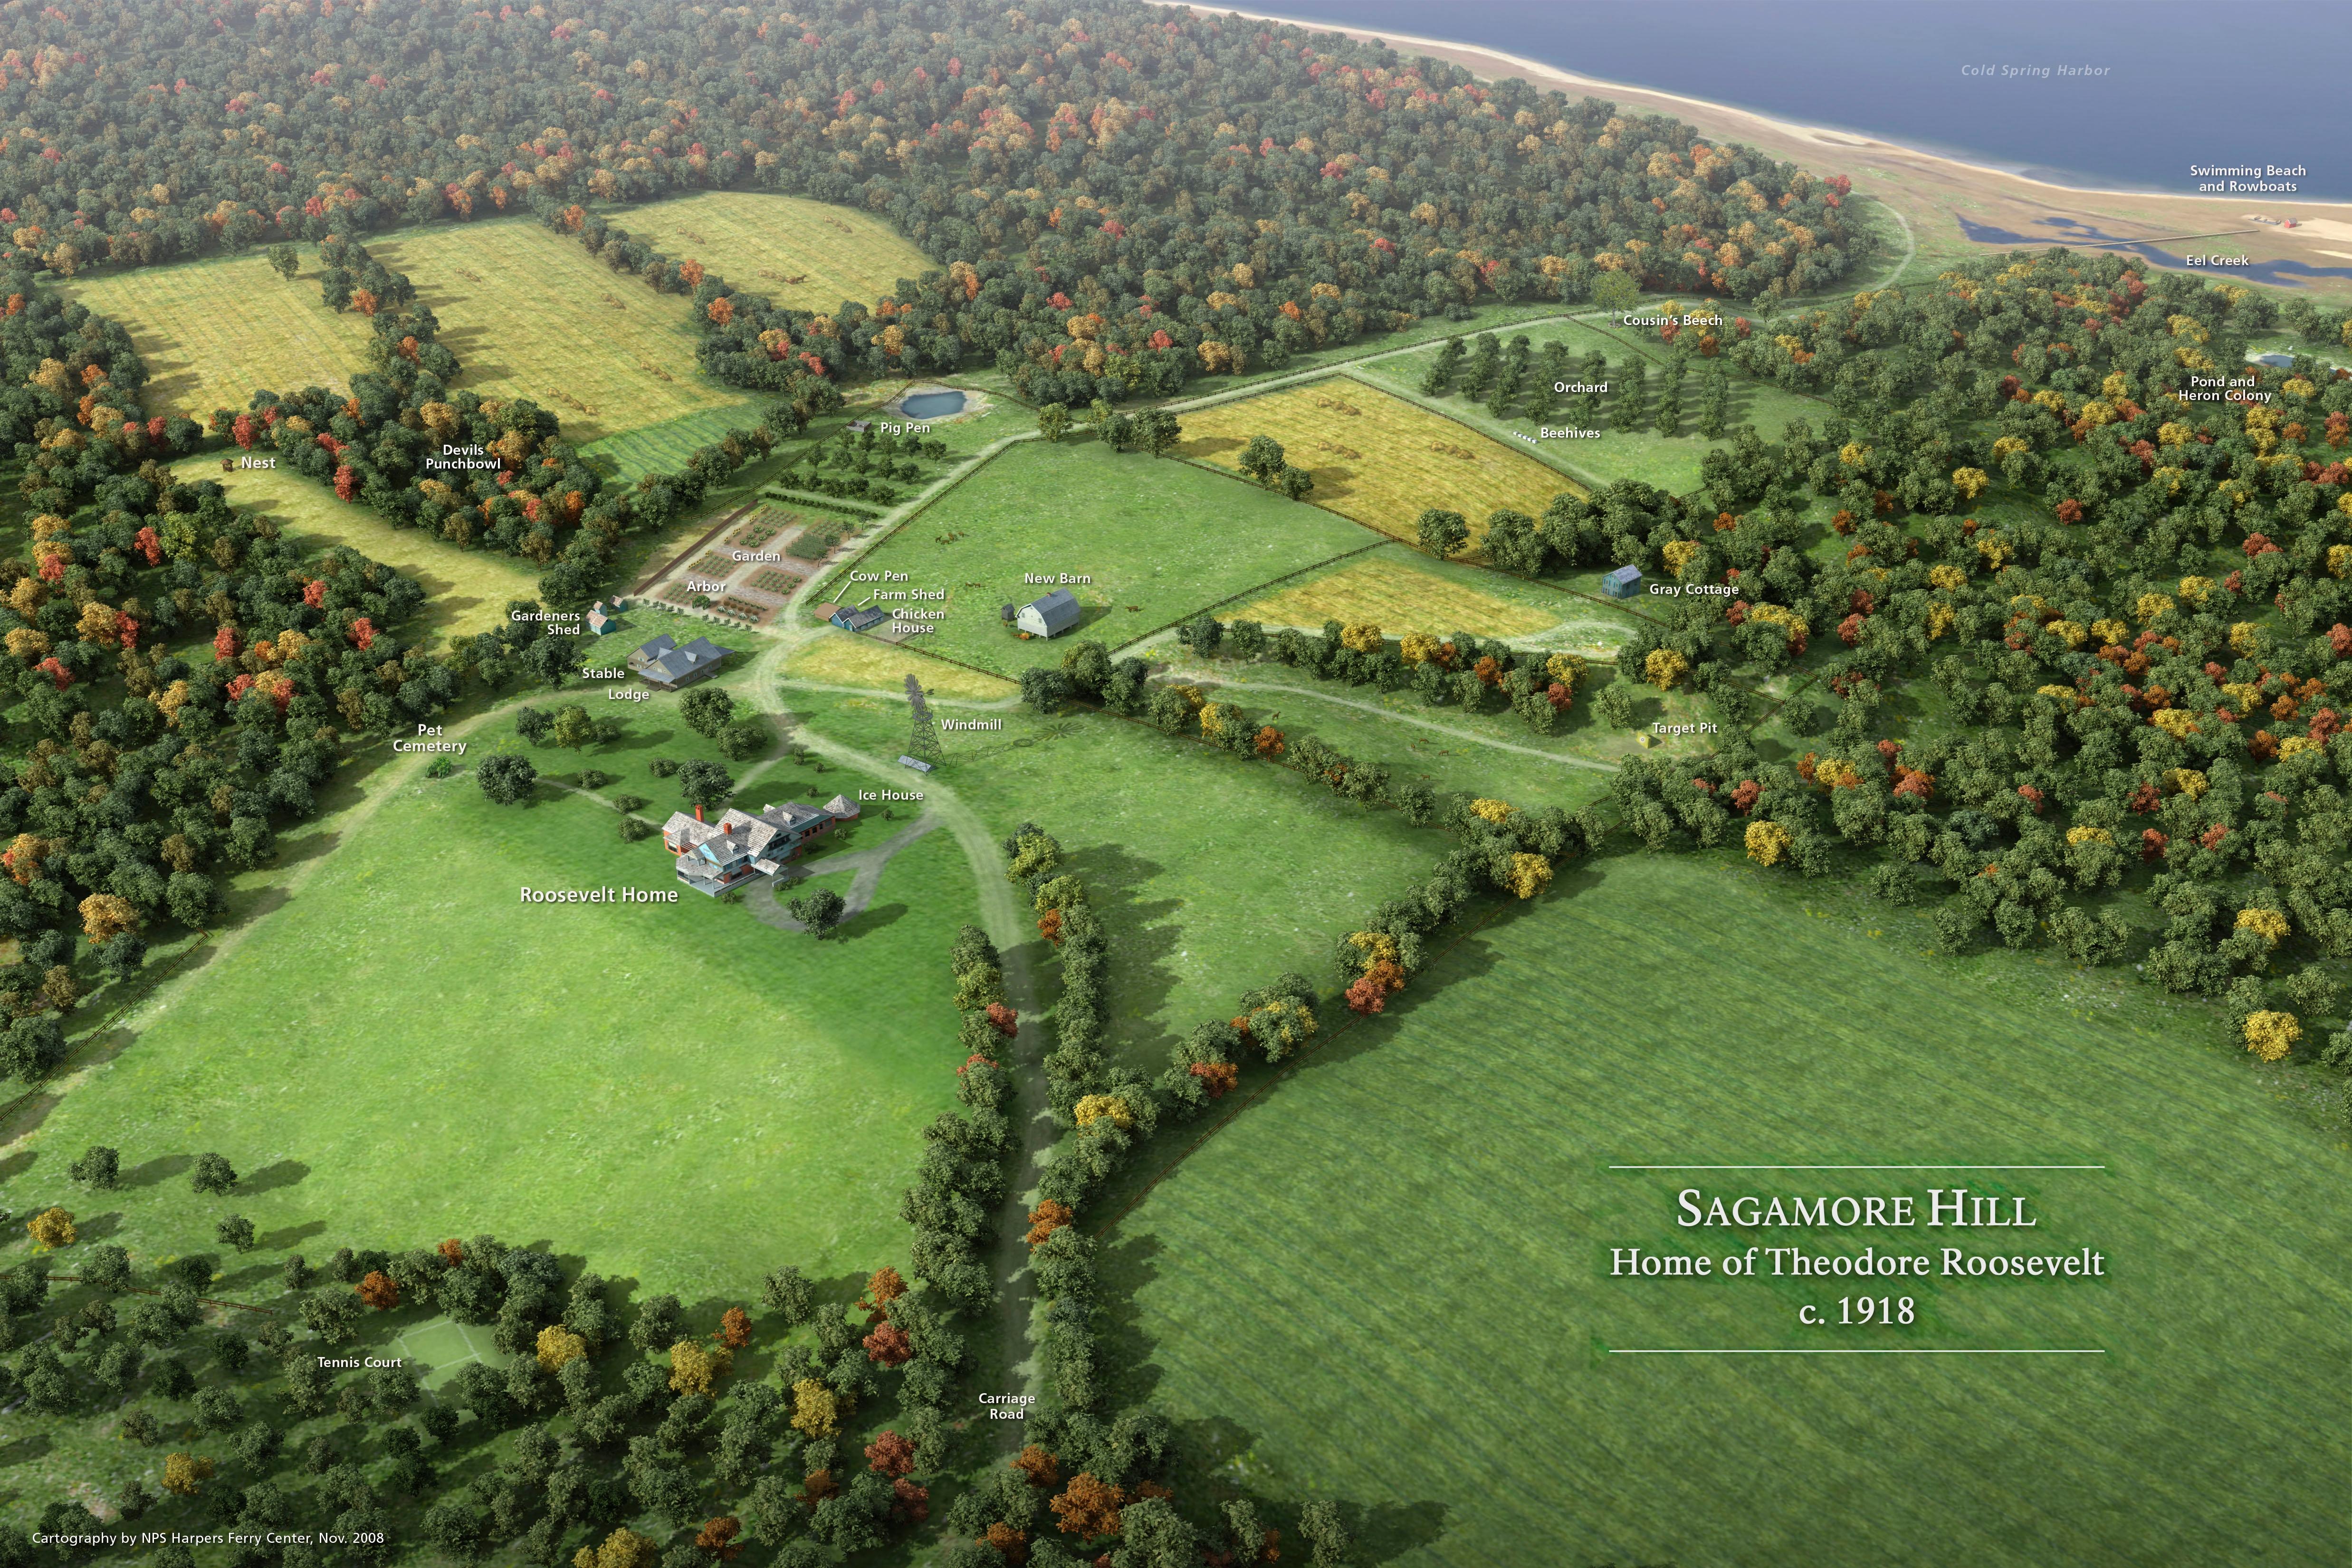 A digital rendering of the Roosevelt home and landscapes of Sagamore Hill circa 1918.